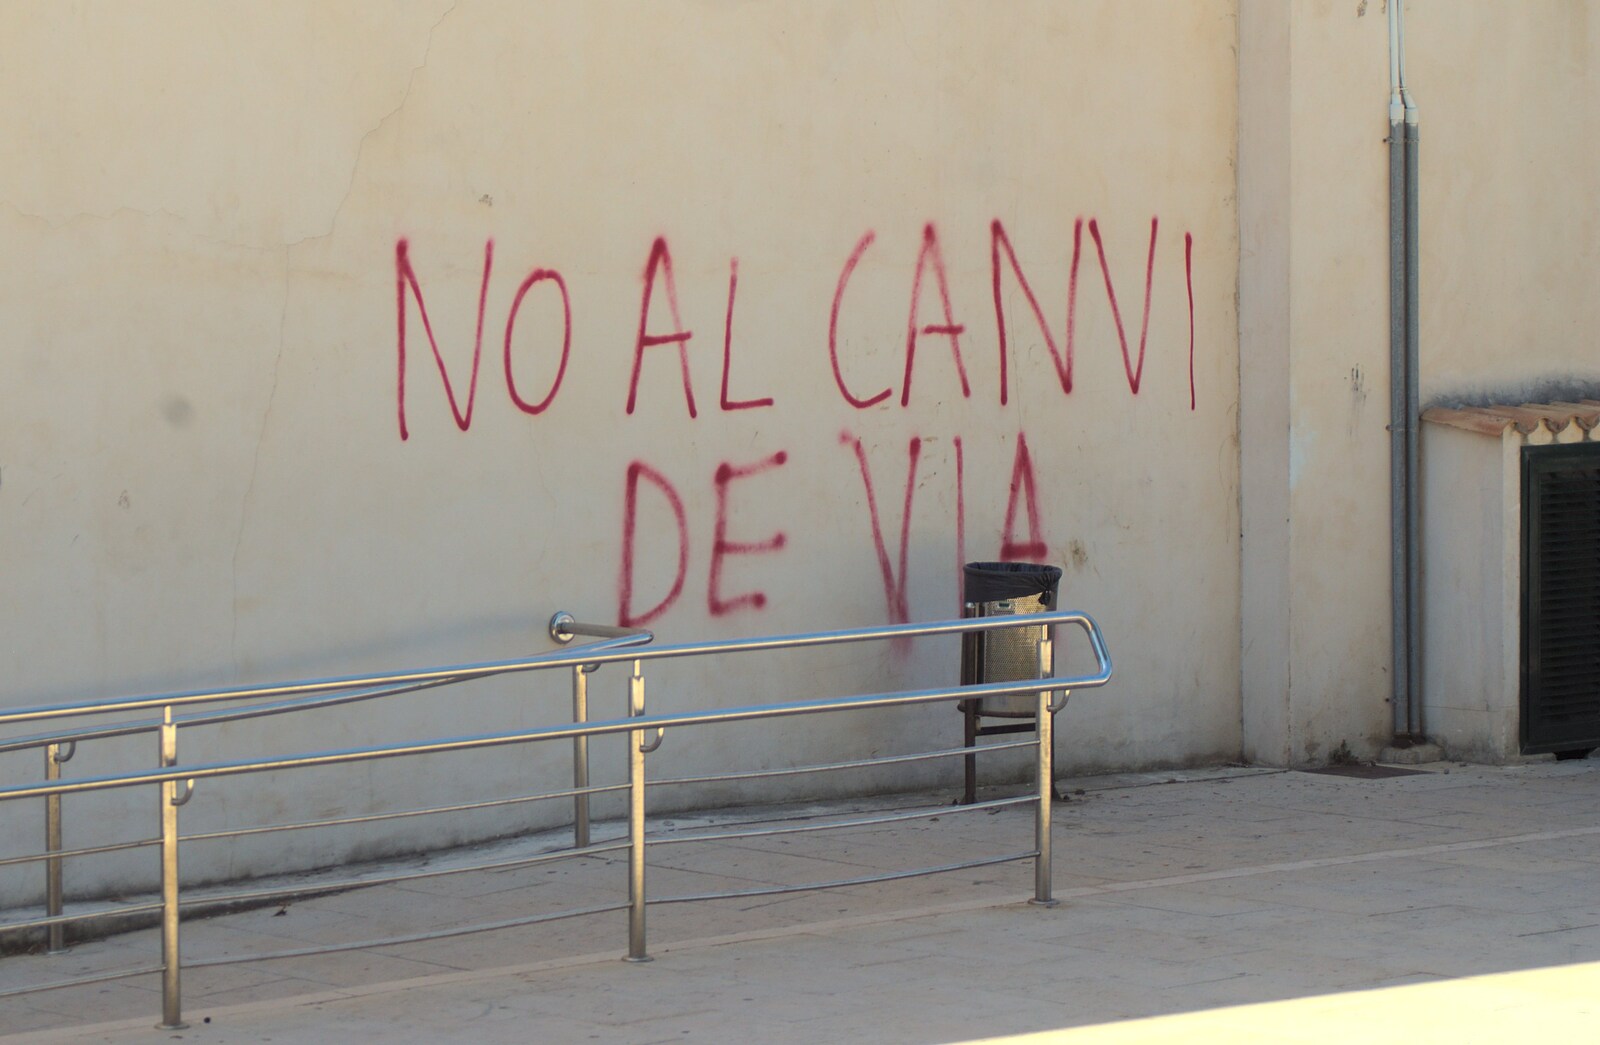 Some sort of protest graffiti on a wall from A Tram Trip to Port Soller, Mallorca - 18th August 2011